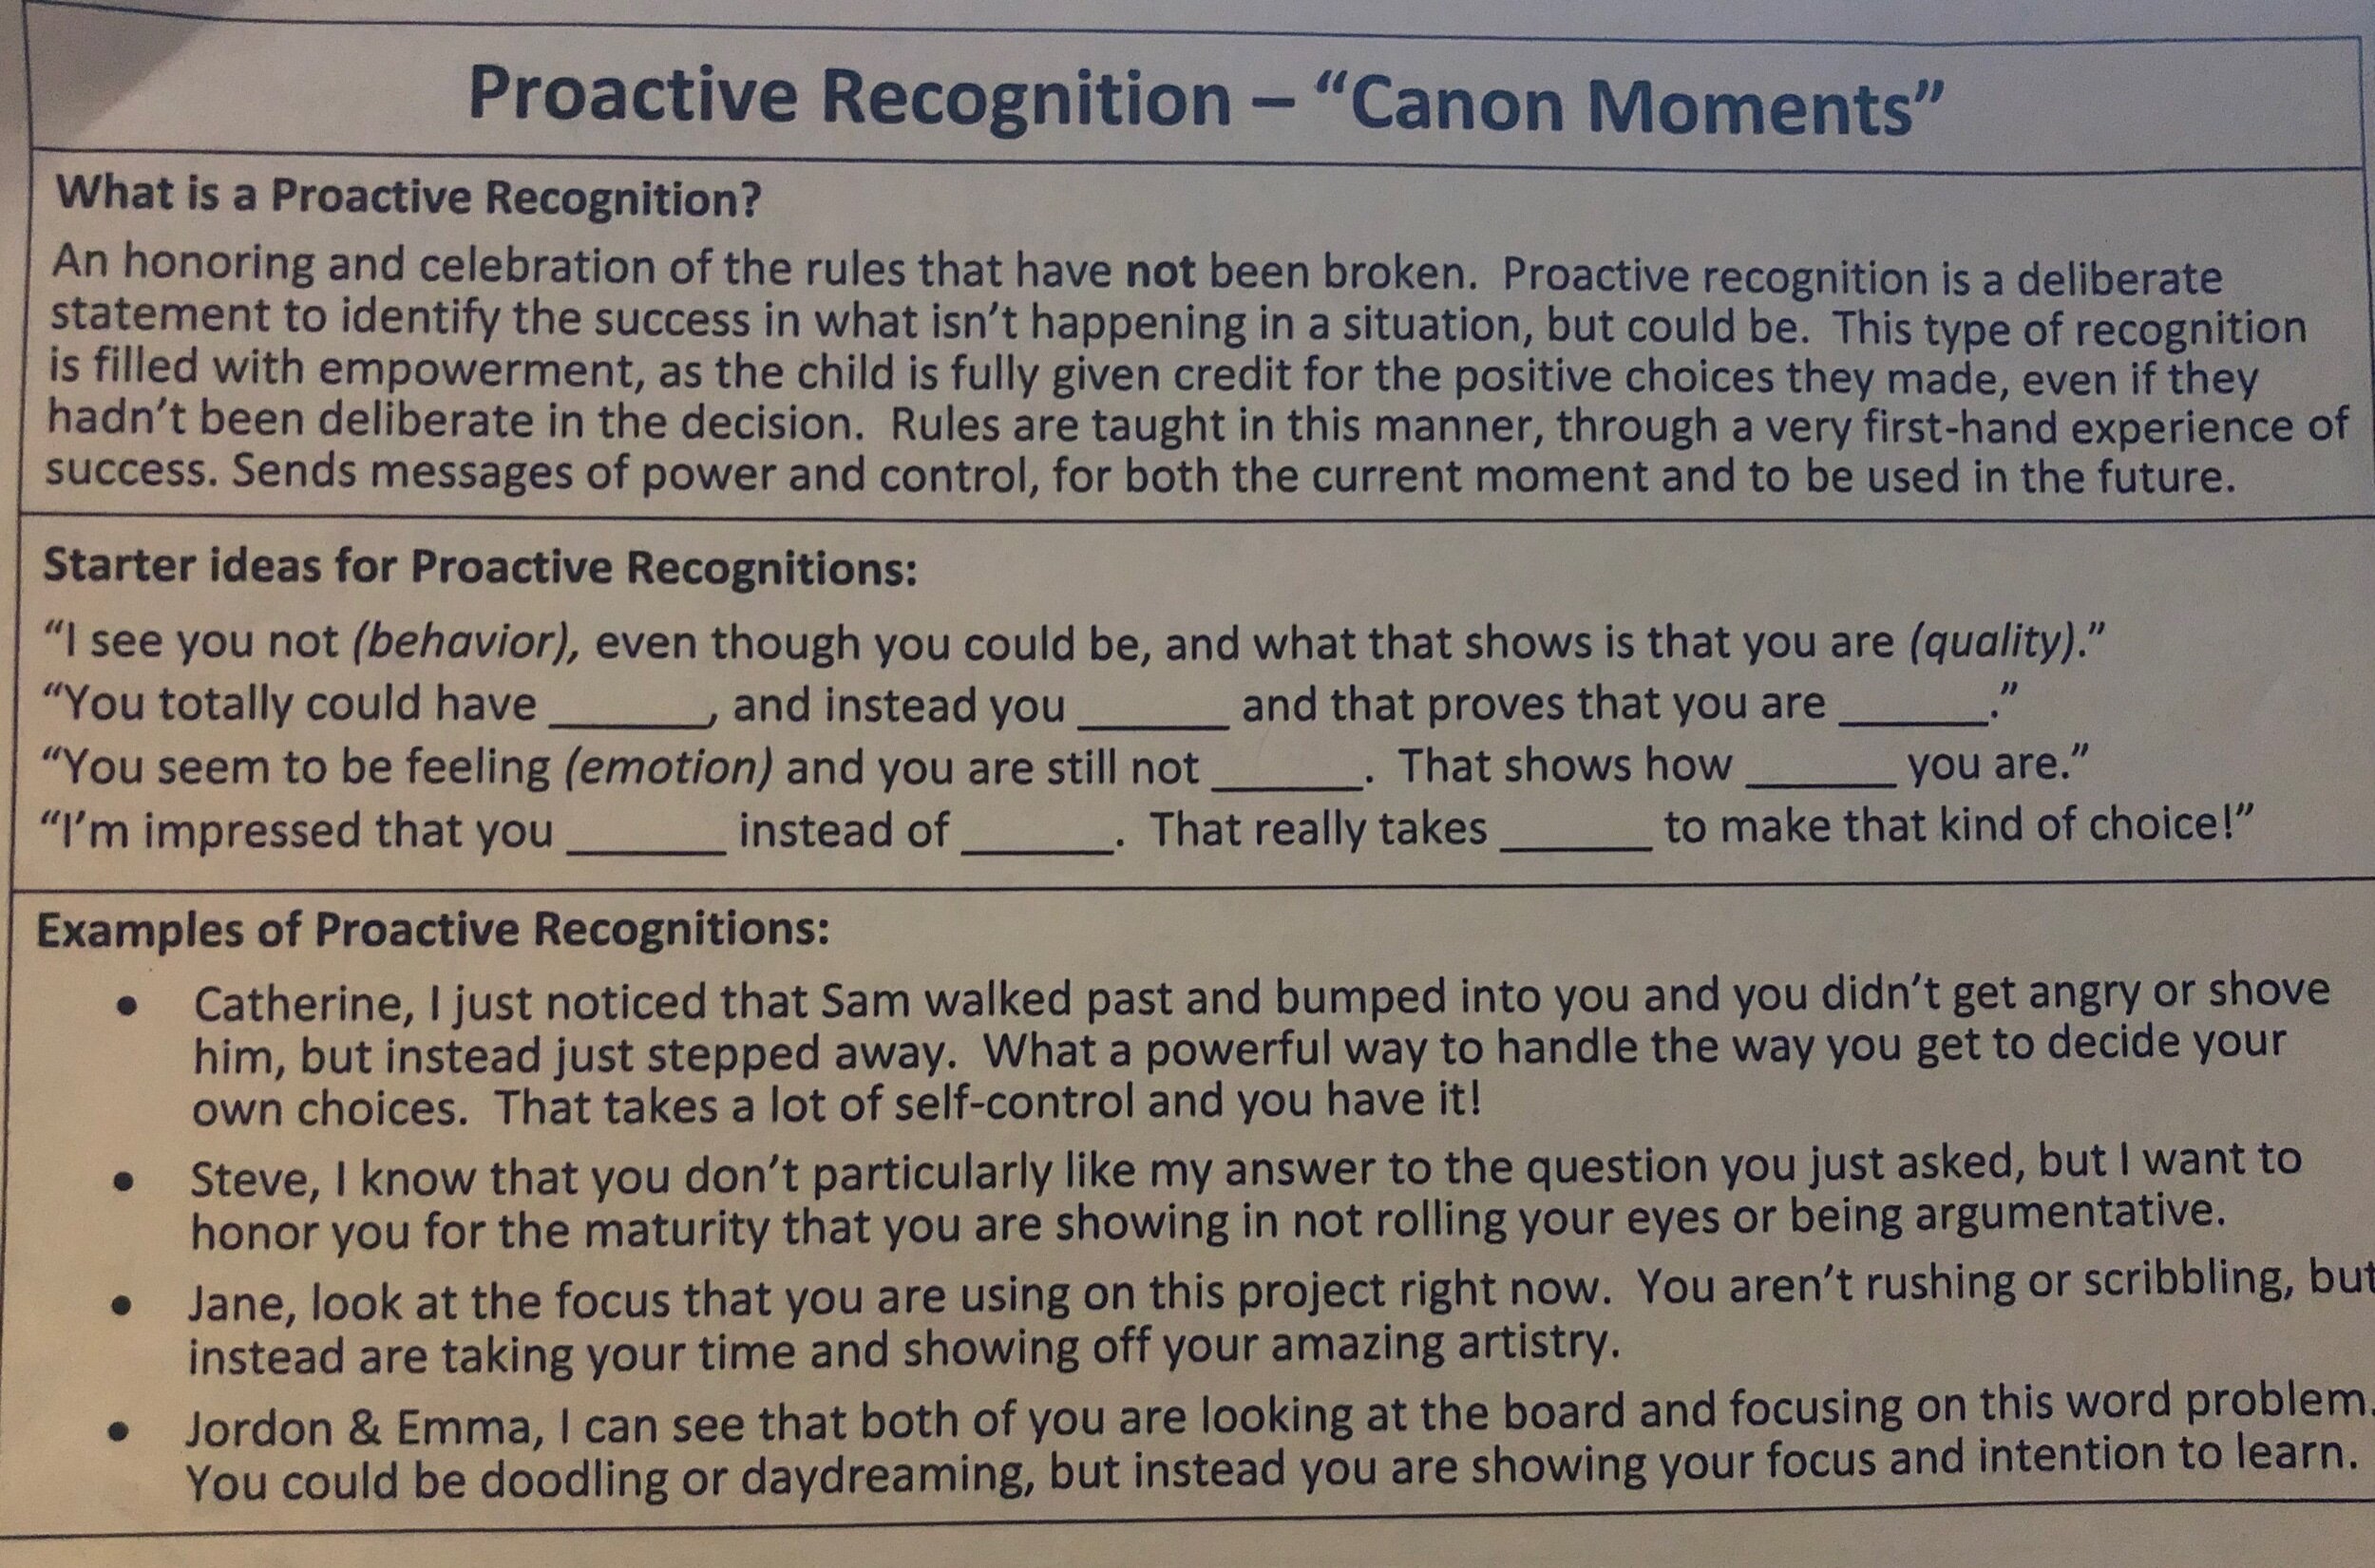 This is a sample from a nurtured heart presentation and introduces the concept of Proactive Recognition from the Nurtured Heart Approach. Copyright 2019: Howard Glasser